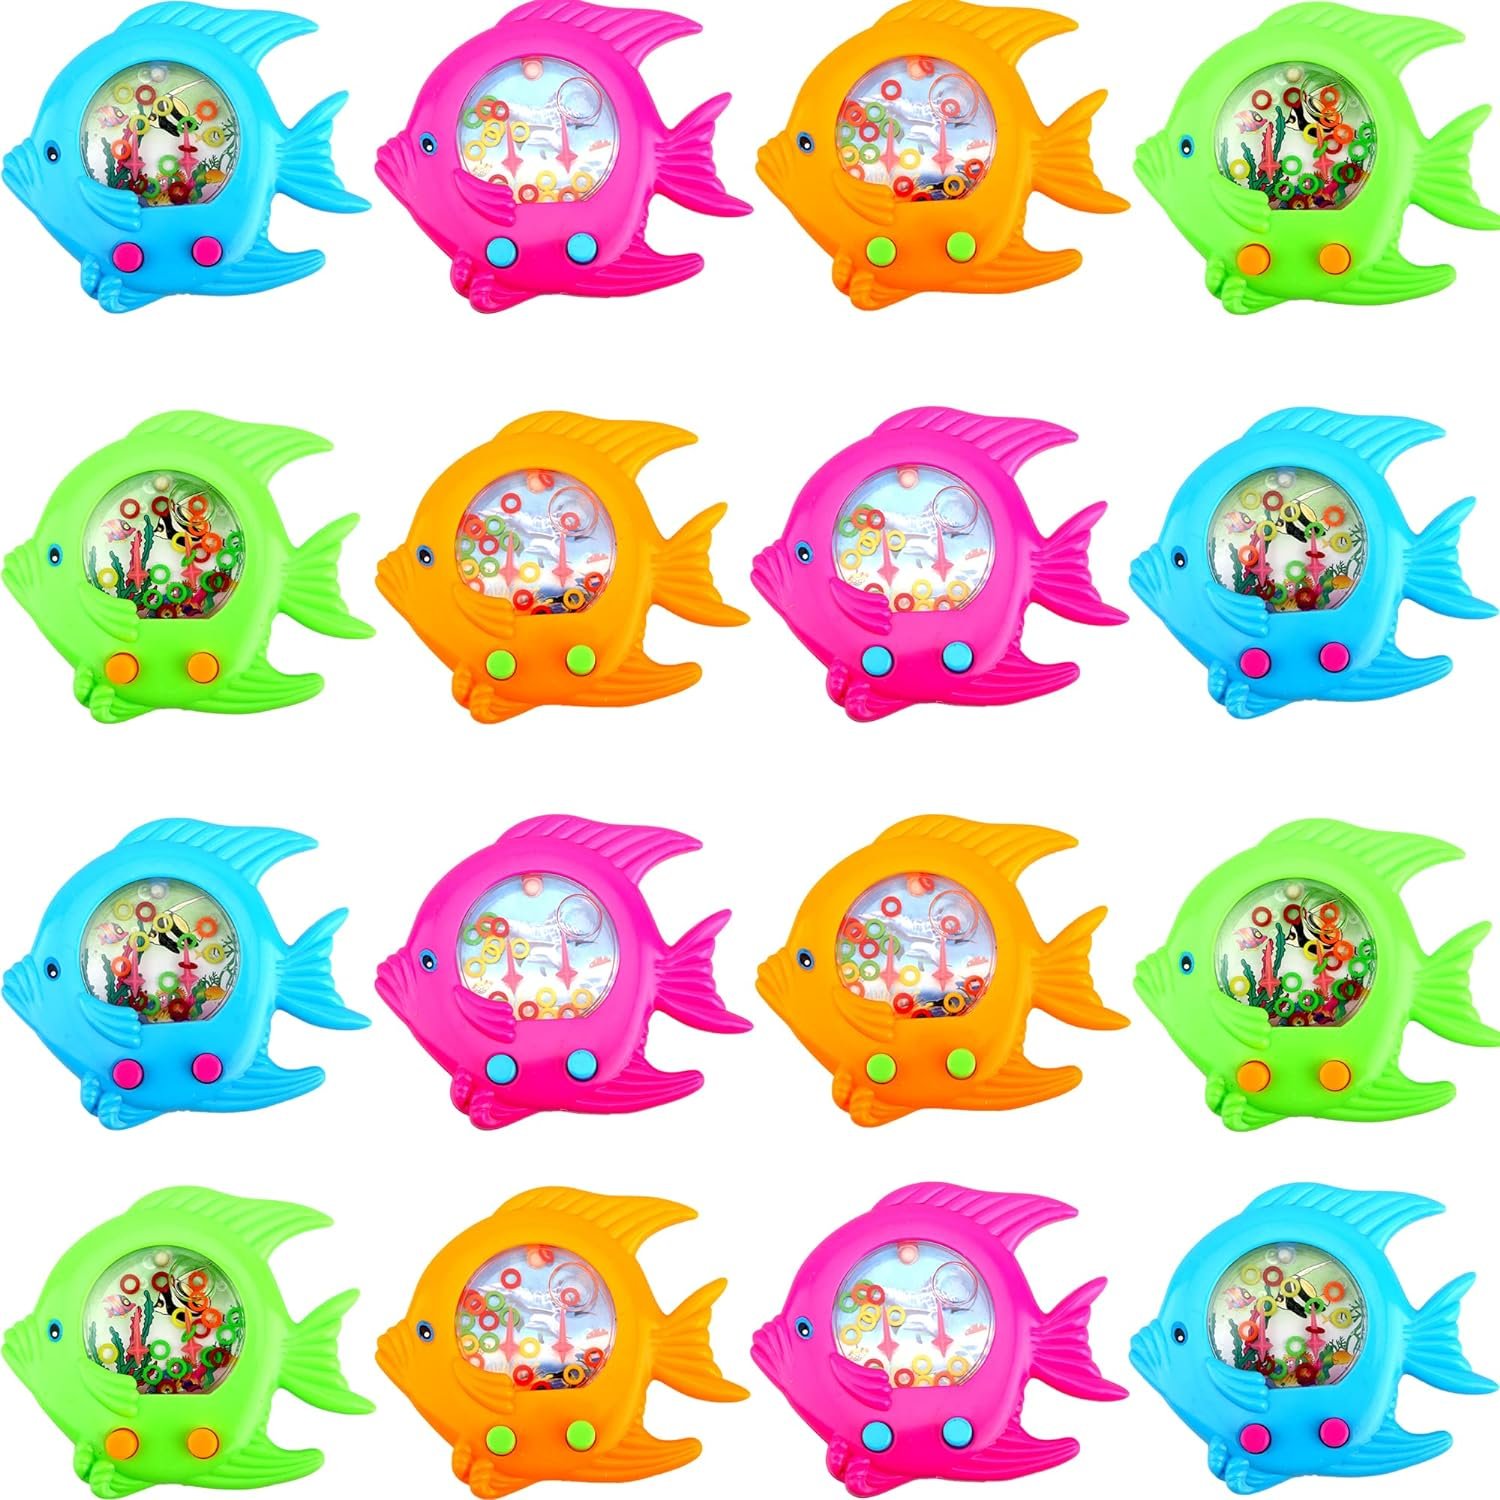 Cotiny 16 Pieces Fish Ring Toss Games Handheld Water Fish Colorful Arcade Retro Pocket Toys for Kids Retro Game Party Favors Game Prizes Travel Pastime Review 1